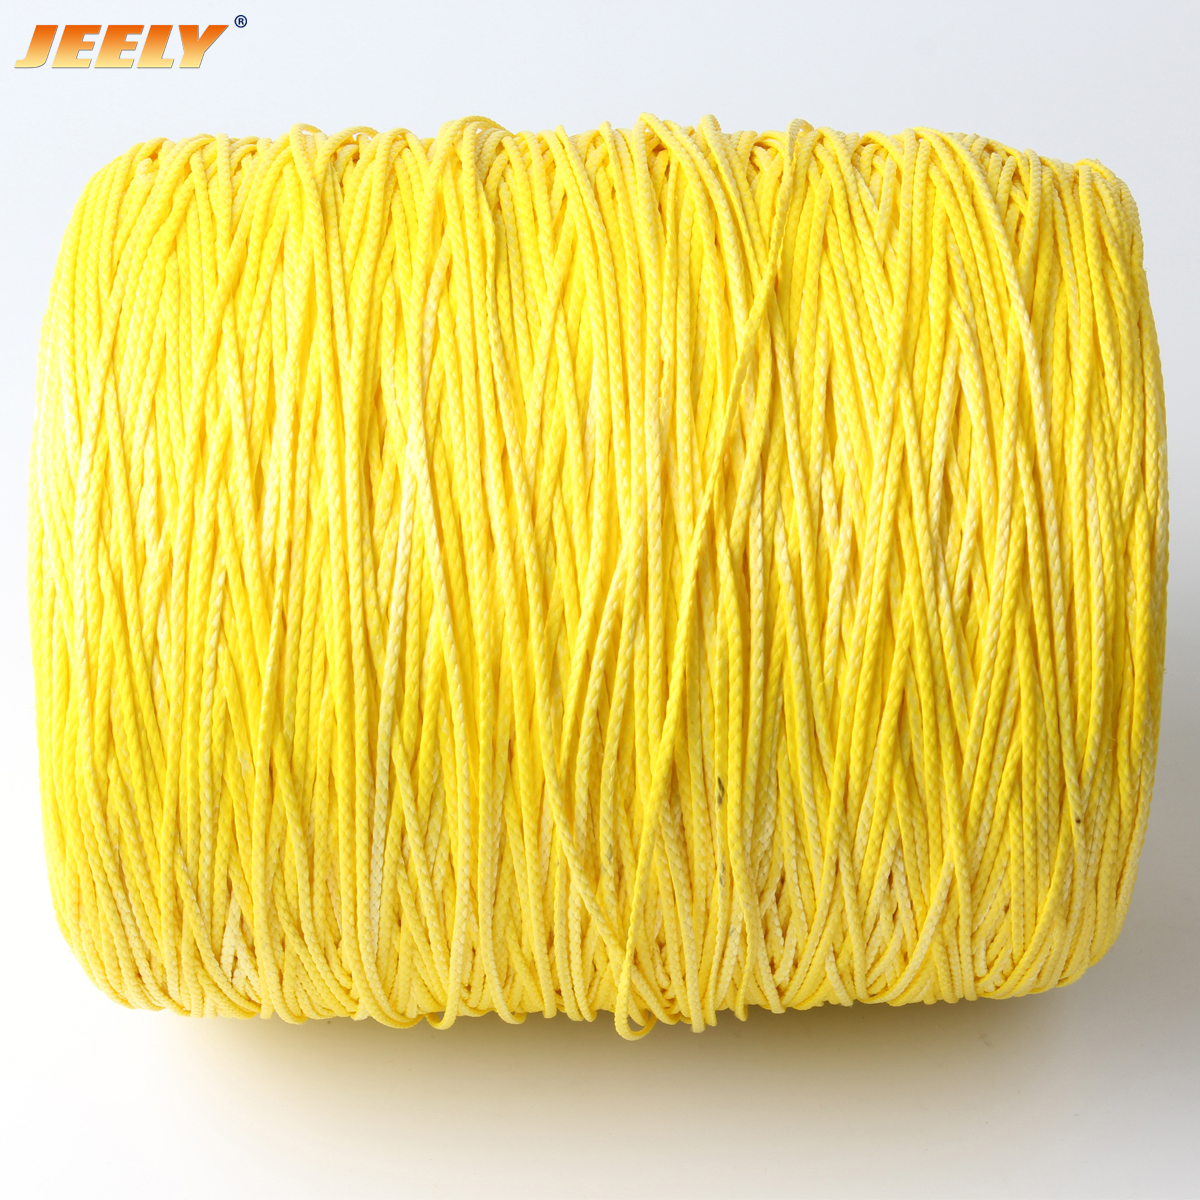 Jeely 1000M 1mm 6 Weaves Braided Towing Winch Line Spectra Windenseil 220lbs